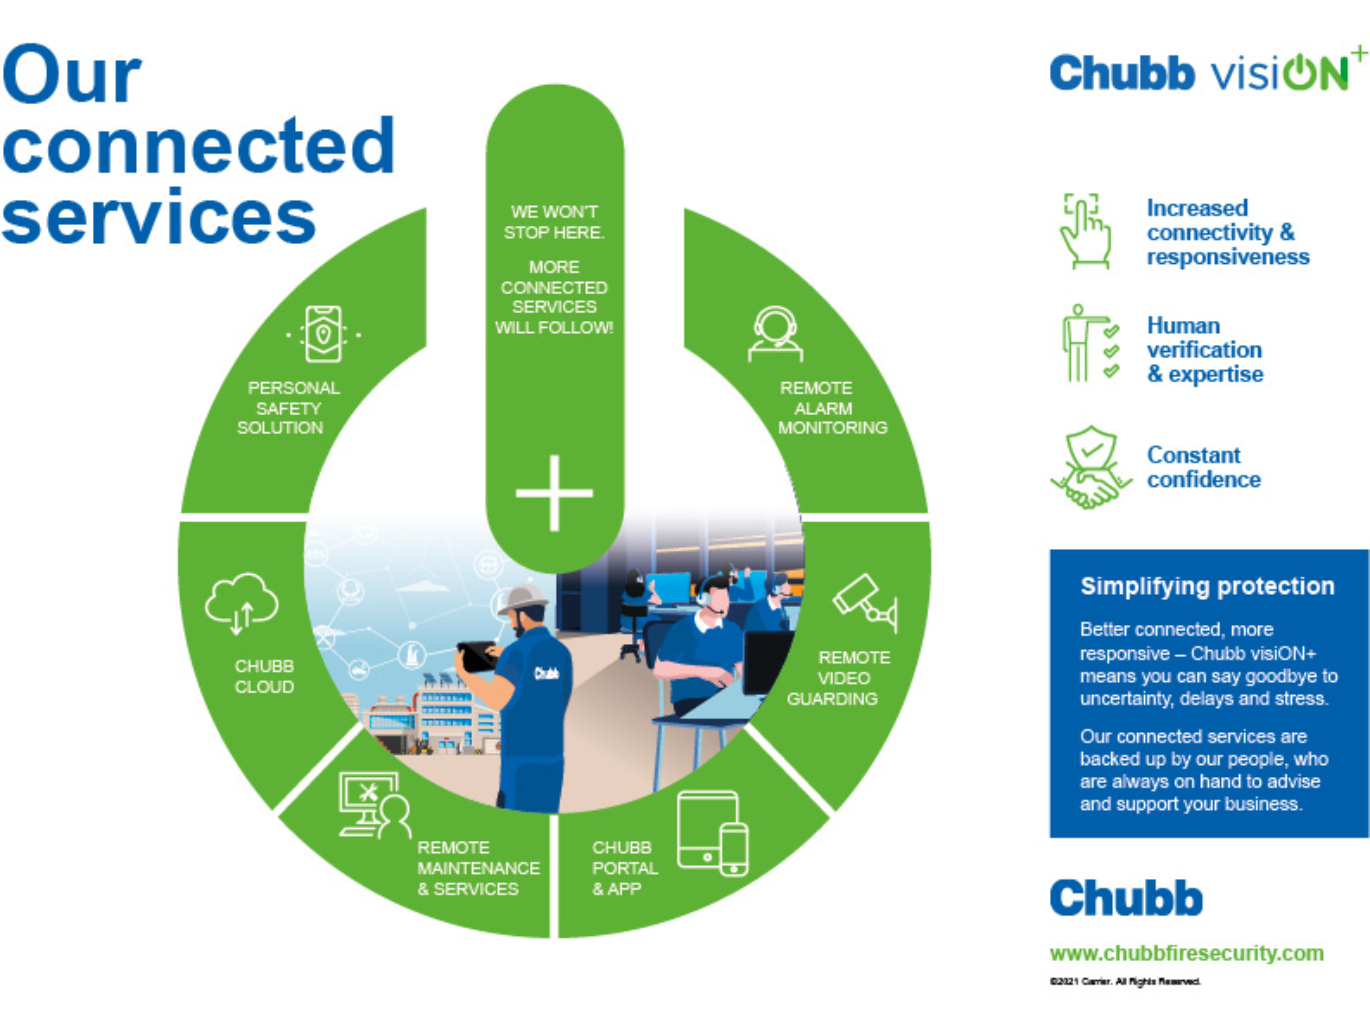 115496-Chubb-visiON_infographic-ext_HiRES_V22